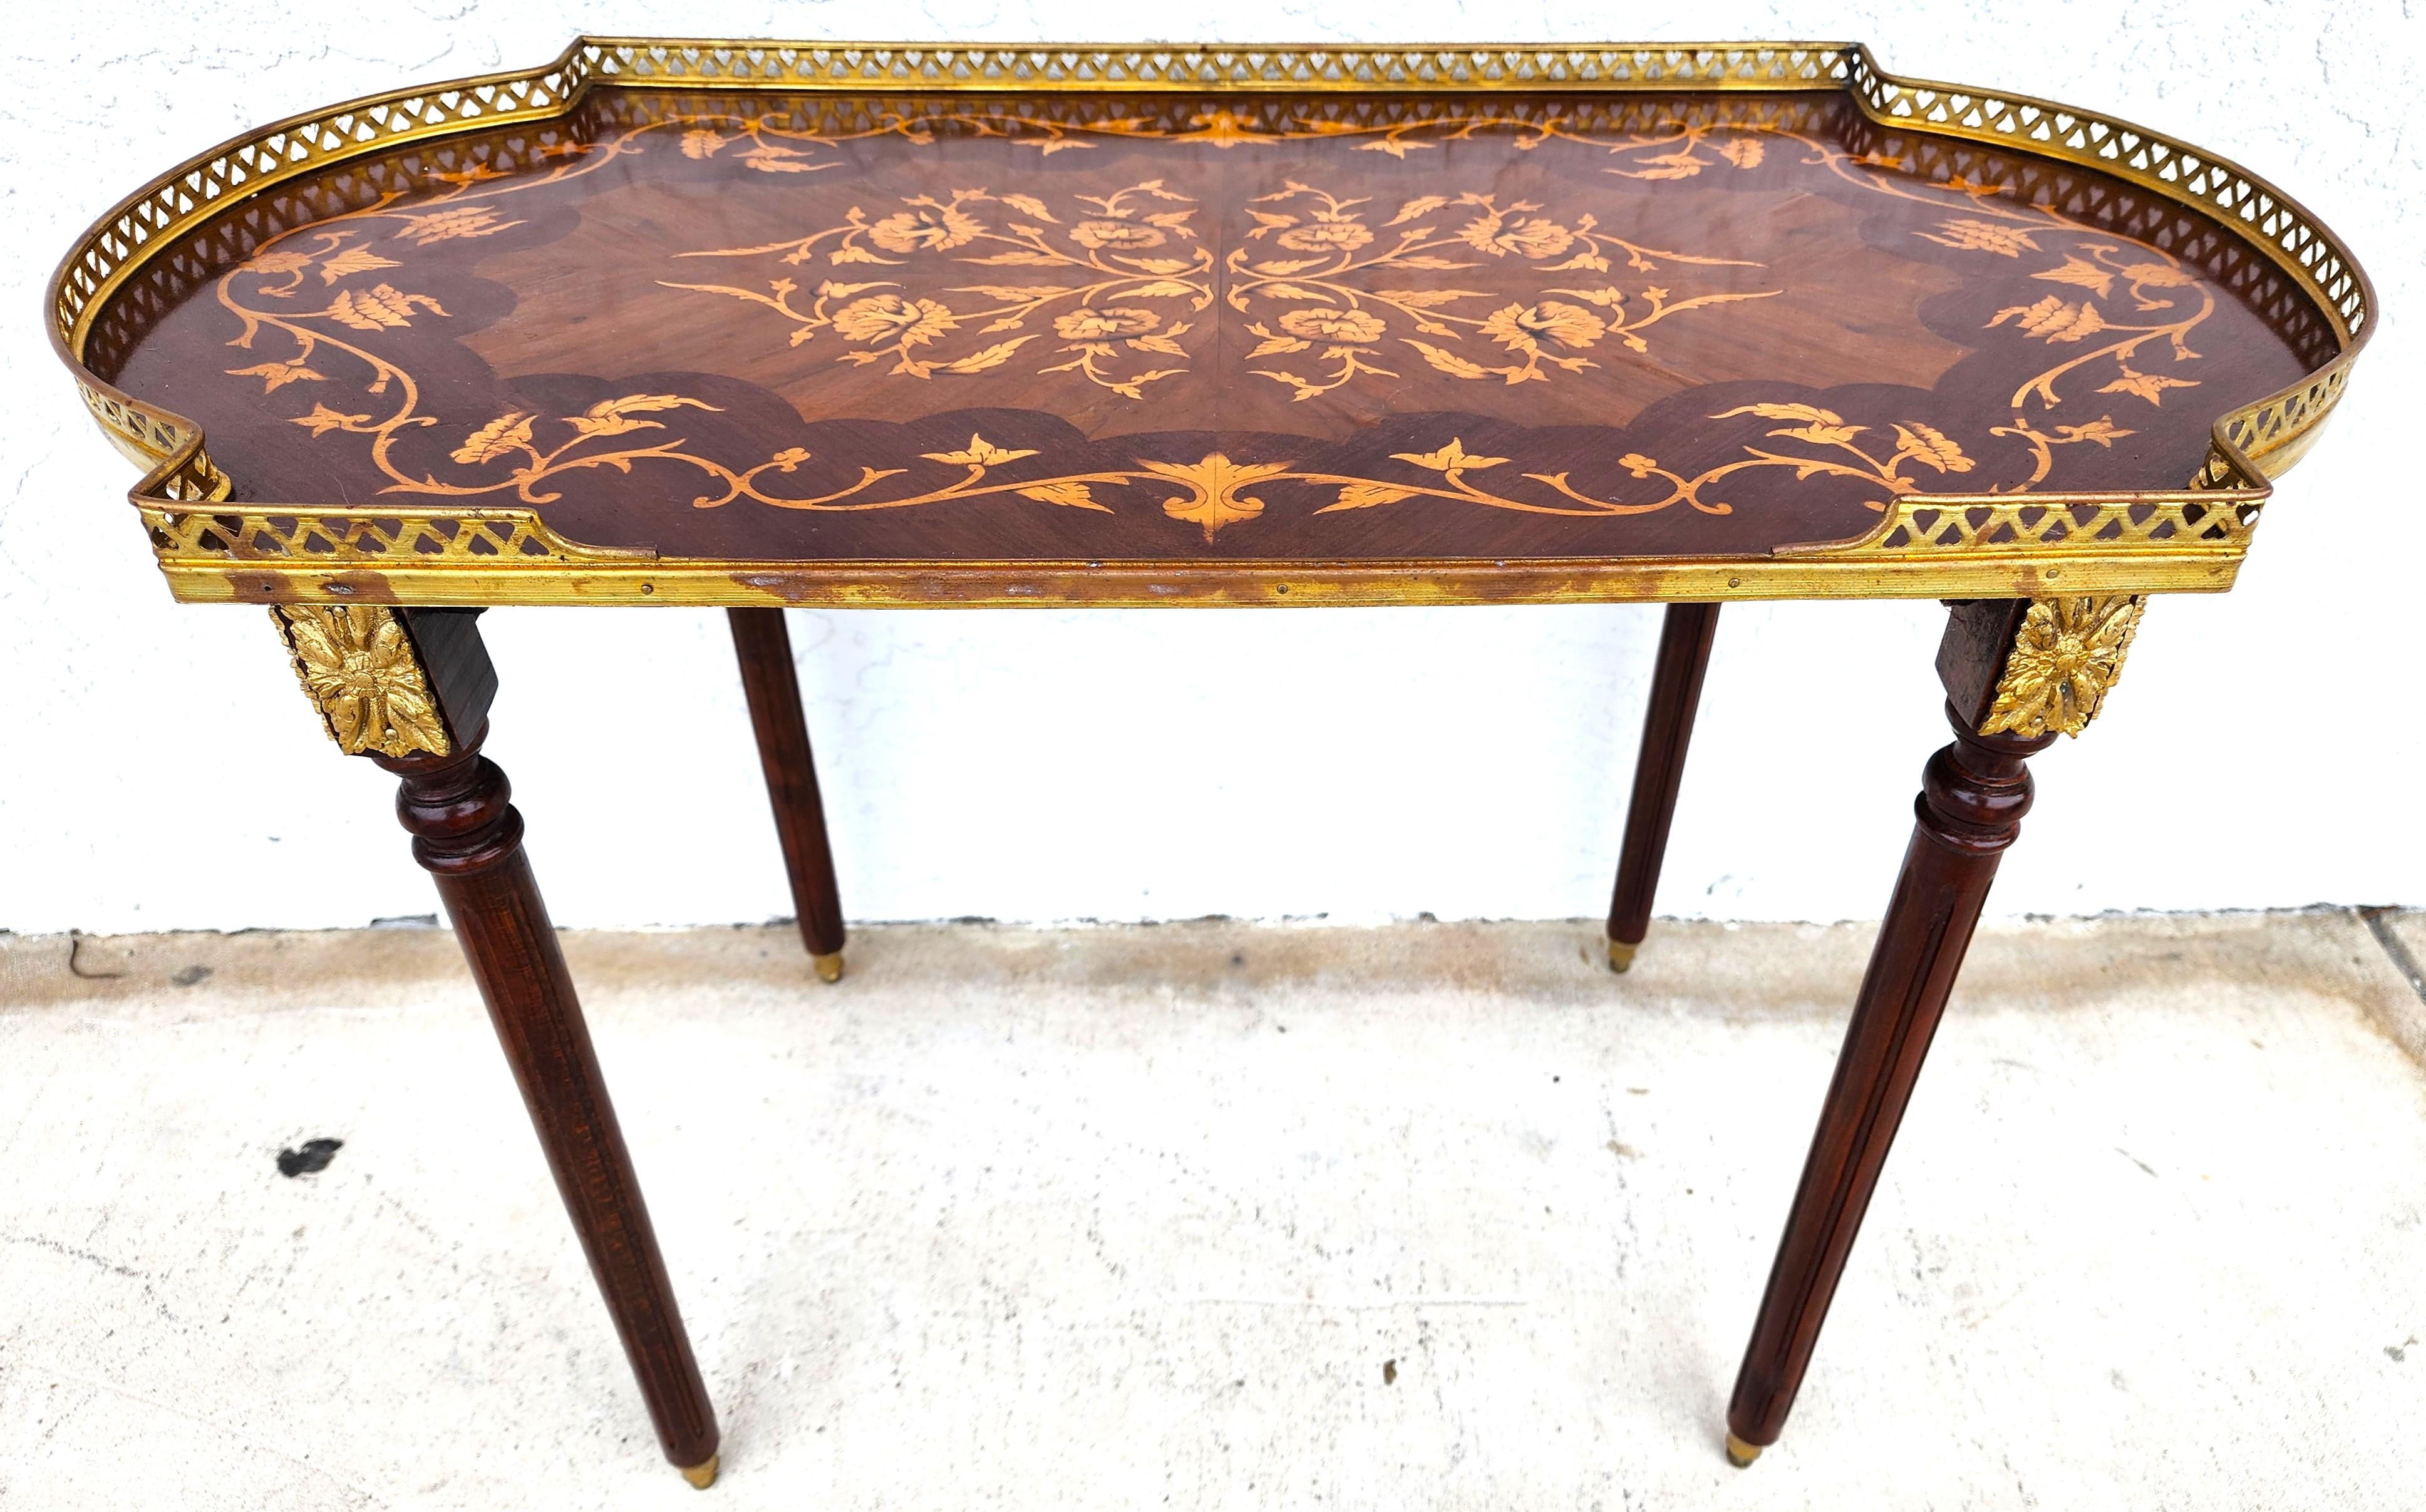 For FULL item description click on CONTINUE READING at the bottom of this page.

Offering One Of Our Recent Palm Beach Estate Fine Furniture Acquisitions Of A
Mid-Century Louis XV Style Accent Serving Tray Table with Inlaid Design, Brass Galery,